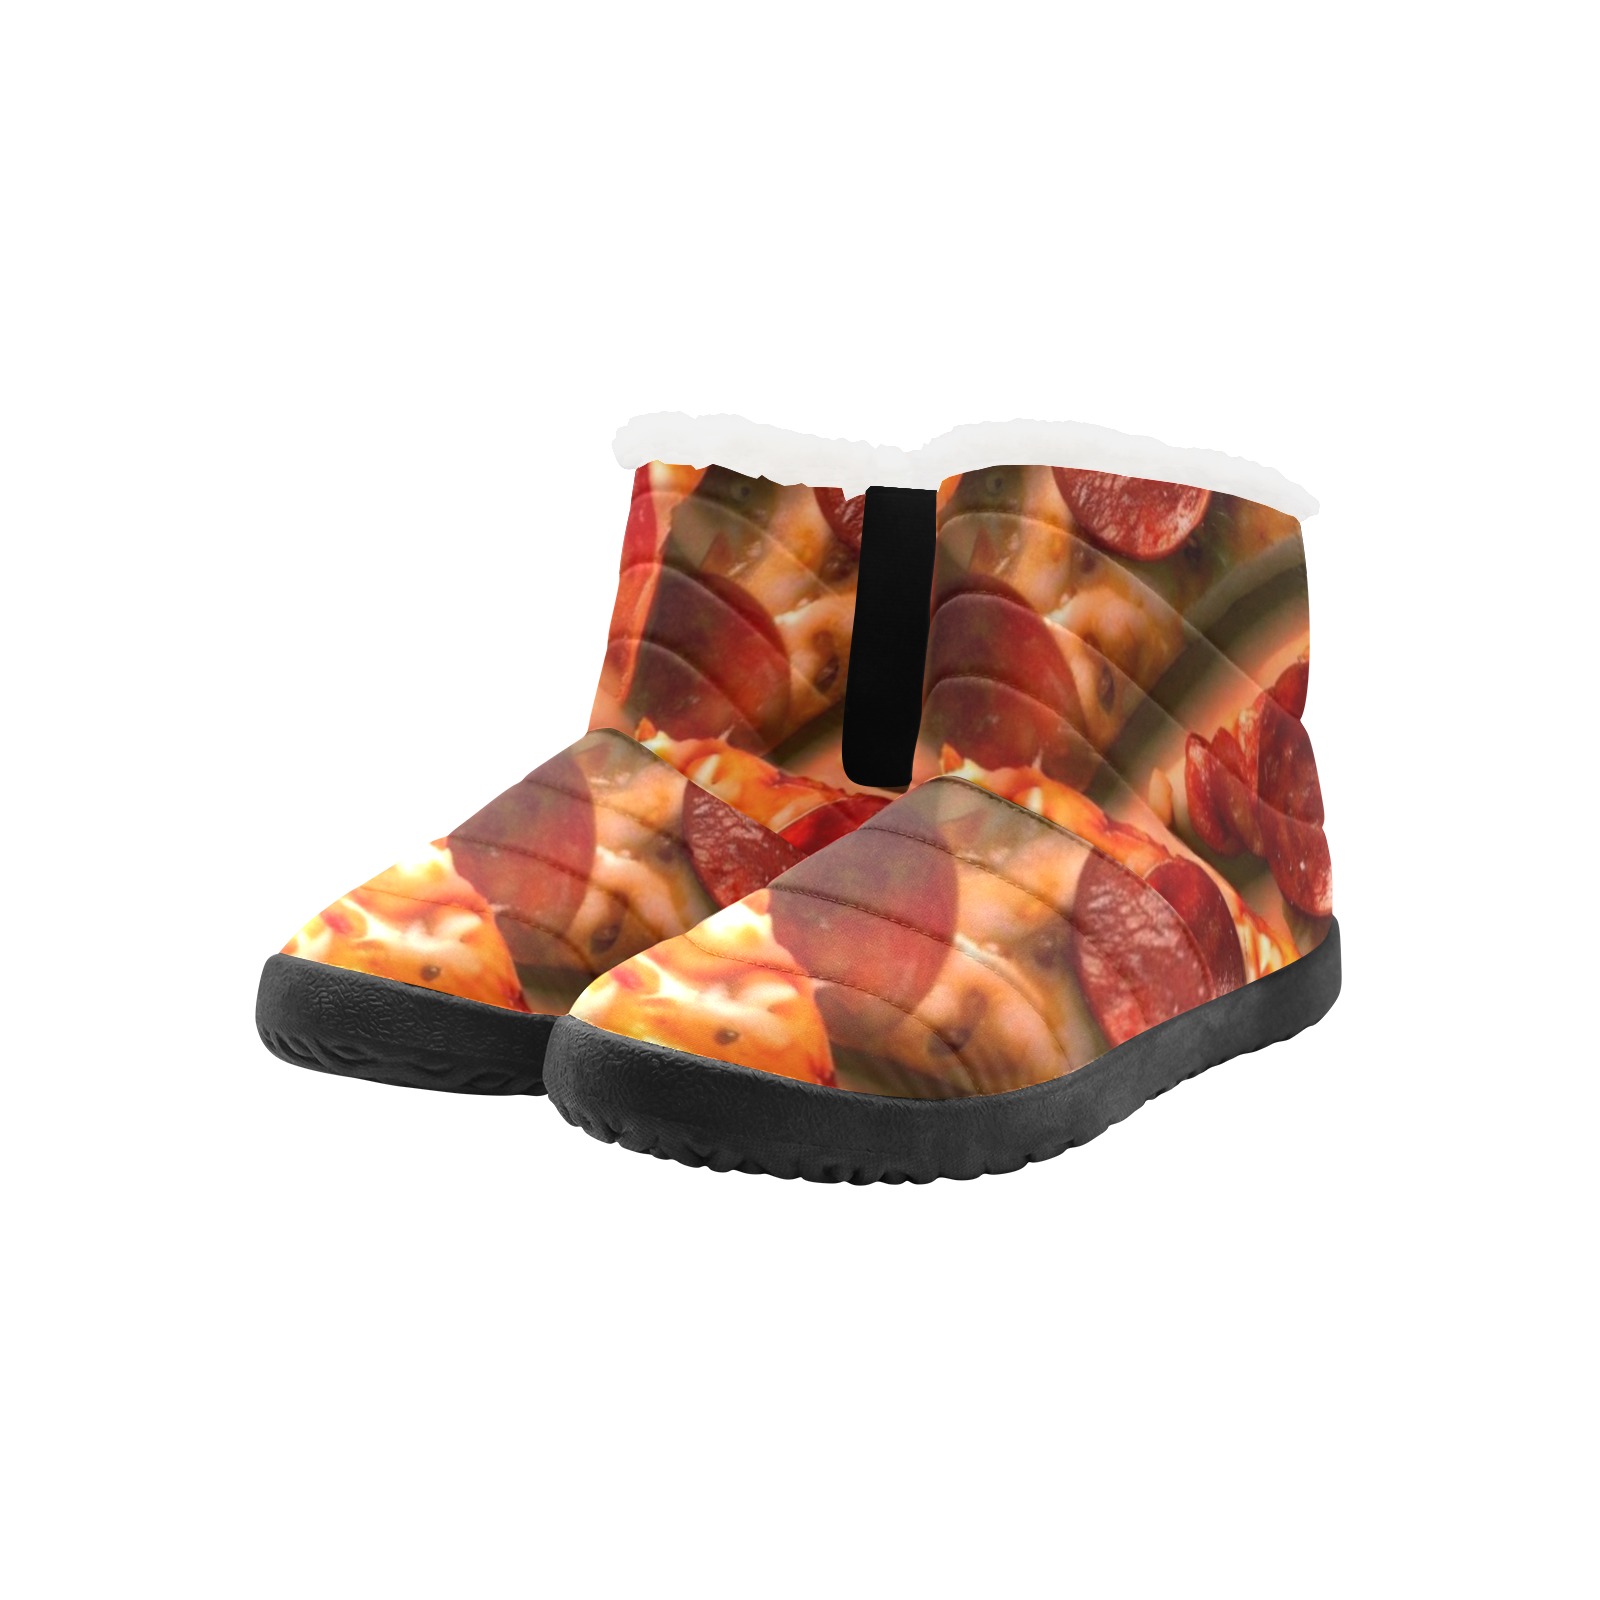 PEPPERONI PIZZA 11 Women's Cotton-Padded Shoes (Model 19291)